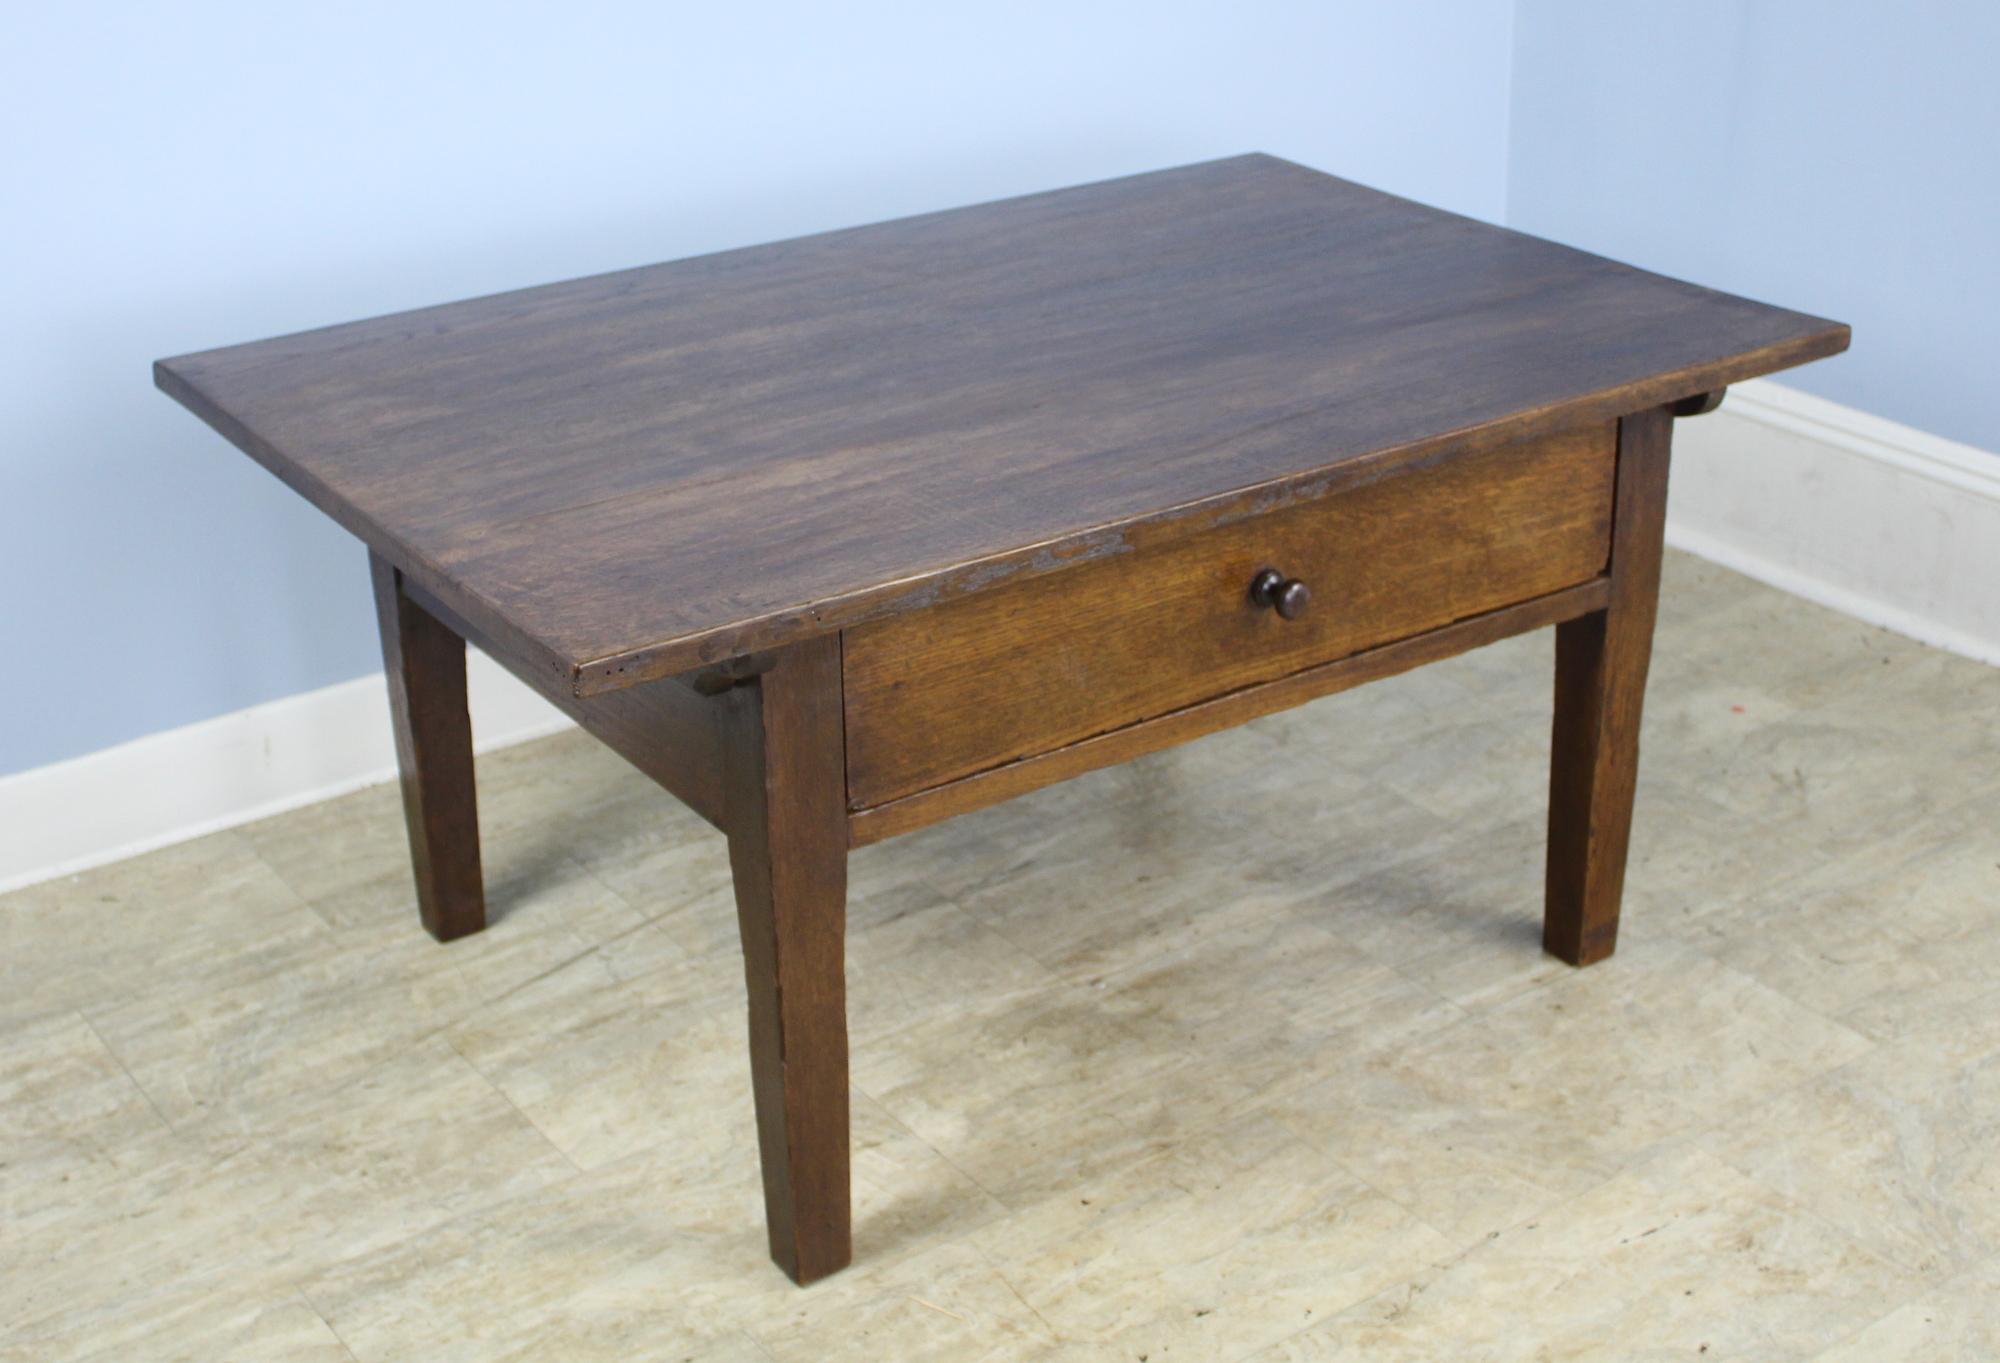 An elegant simple chestnut coffee table with an immaculate and beautifully grained top. Single deep and roomy drawer slides easily and closes snugly.